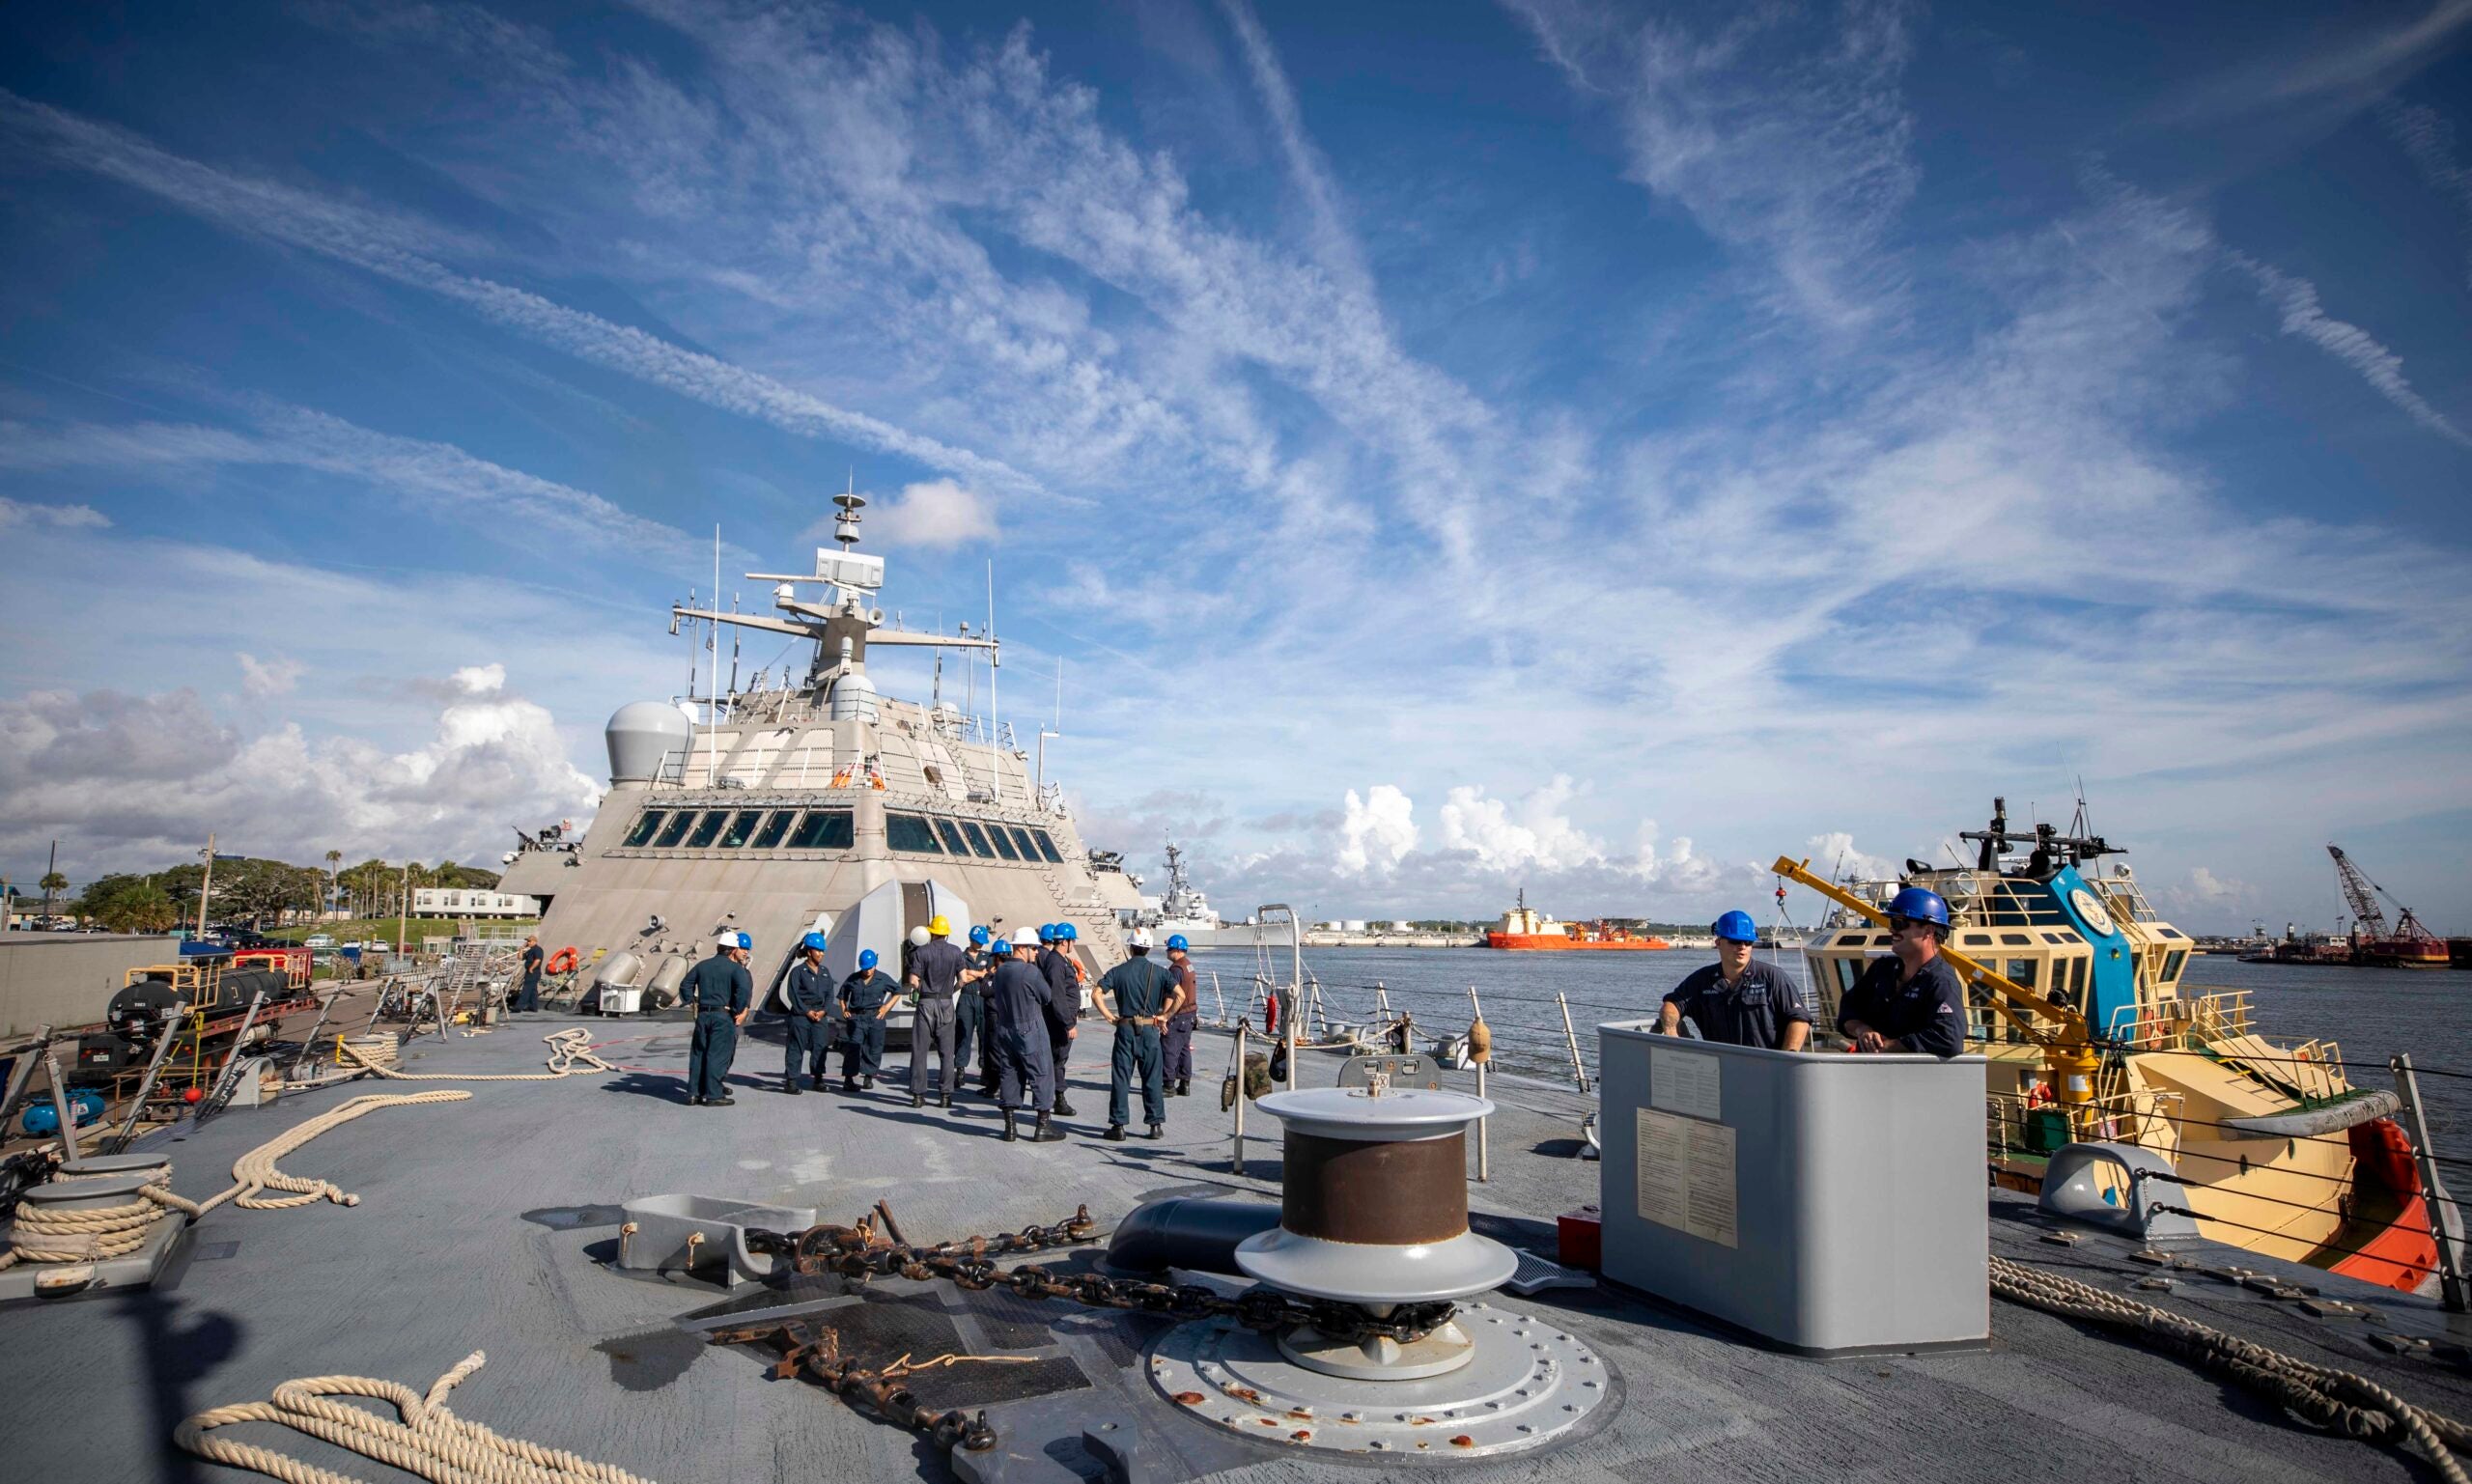 NAVAL STATION MAYPORT - (June 30, 2021) – Sailors man their station on the fo’c’sle during a sea and anchor evolution aboard the Freedom-variant littoral combat ship USS Billings (LCS 15), as the ship departs for its maiden deployment, June 30, 2021. During the deployment to the U.S. Southern Command's area of responsibility, Billings, with embarked helicopter and USCG law enforcement detachment, will support Joint Interagency Task Force South's mission, which includes counter-illicit drug trafficking in the Caribbean and Eastern Pacific. (U.S. Navy photo by Mass Communication Specialist 3rd Class Austin G. Collins/Released)